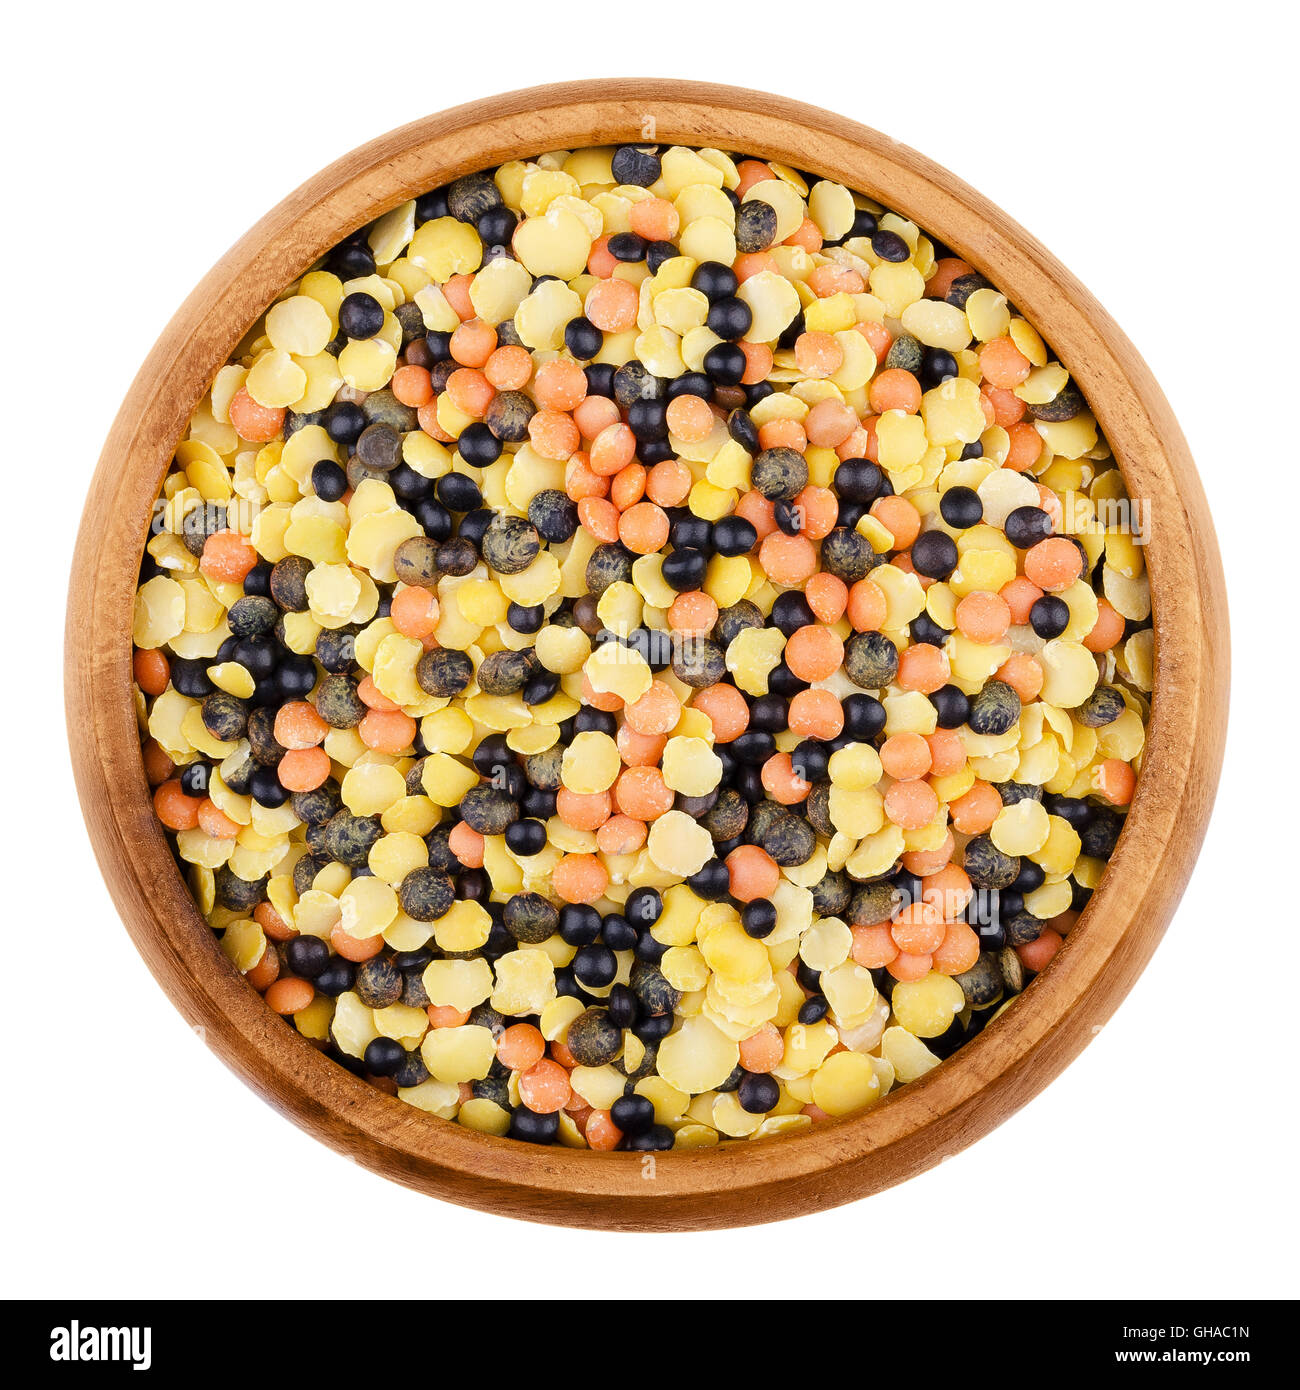 Mixed lentils in a wooden bowl on white background. Yellow, green, red and black beluga lentils. Stock Photo